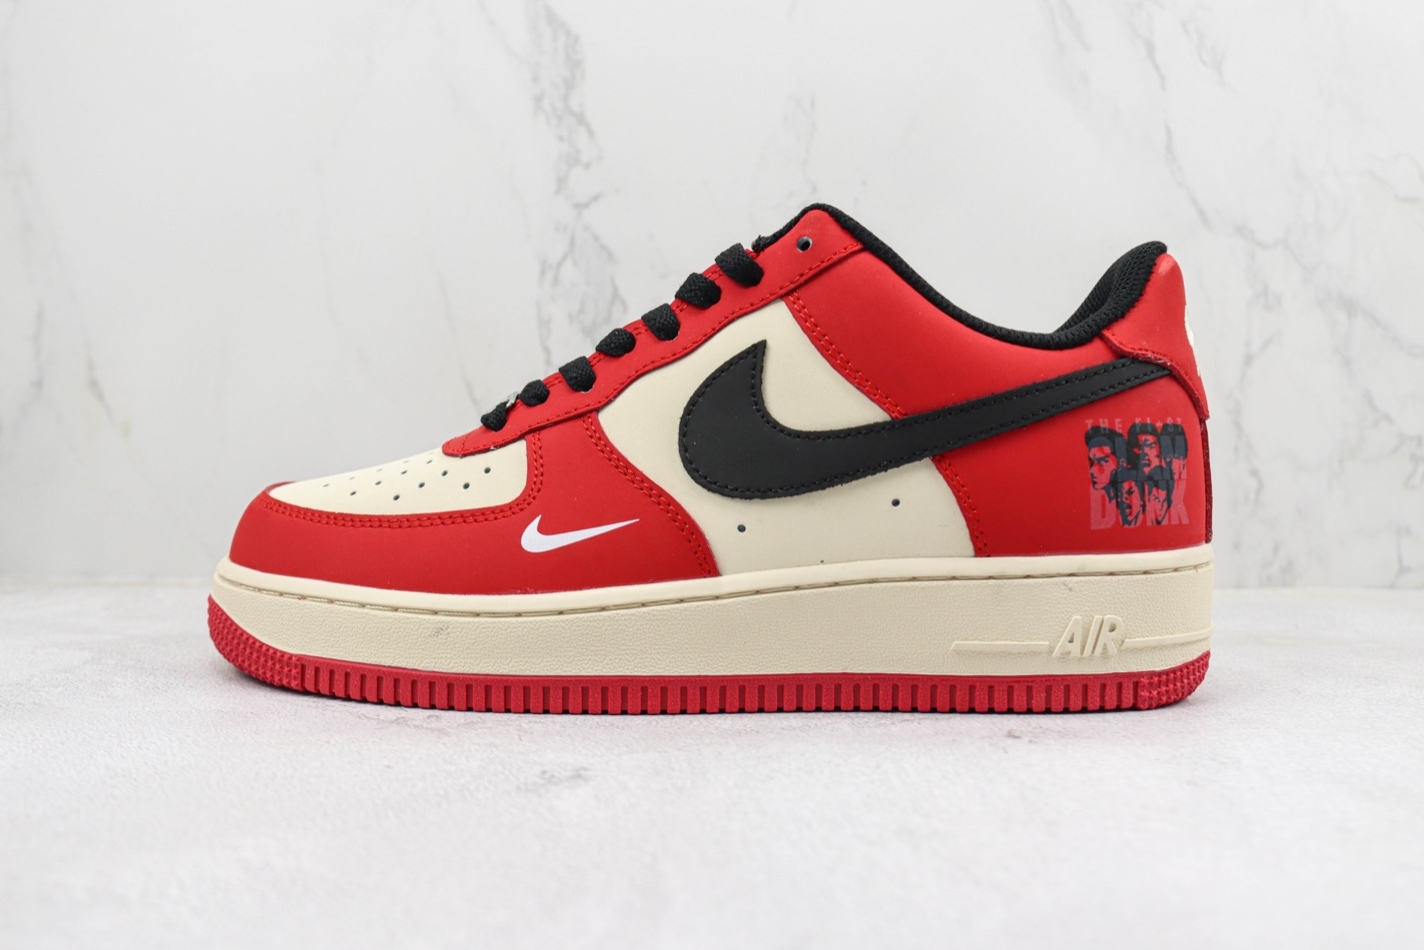 Nike Air Force 1 07 Low Red Black White BS9055-718 - Stylish Sneakers for Ultimate Comfort